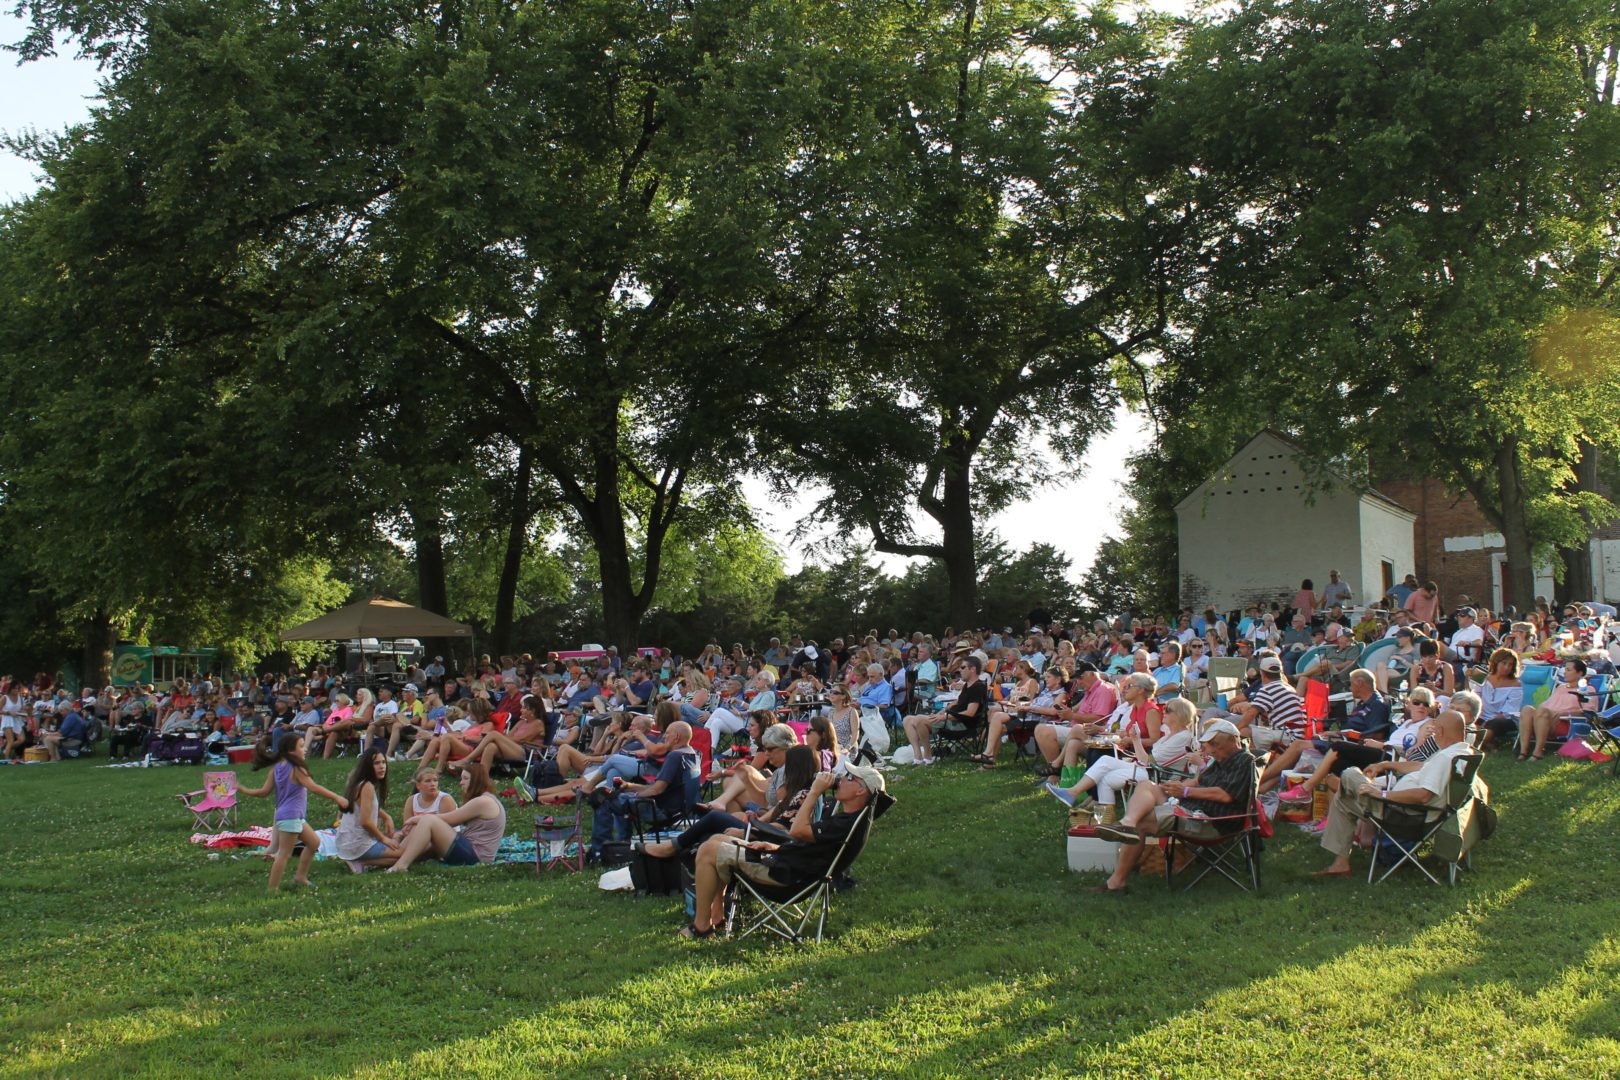 Crowd at Carnton during the Franklin, TN concert event, Sunset Concert Series.